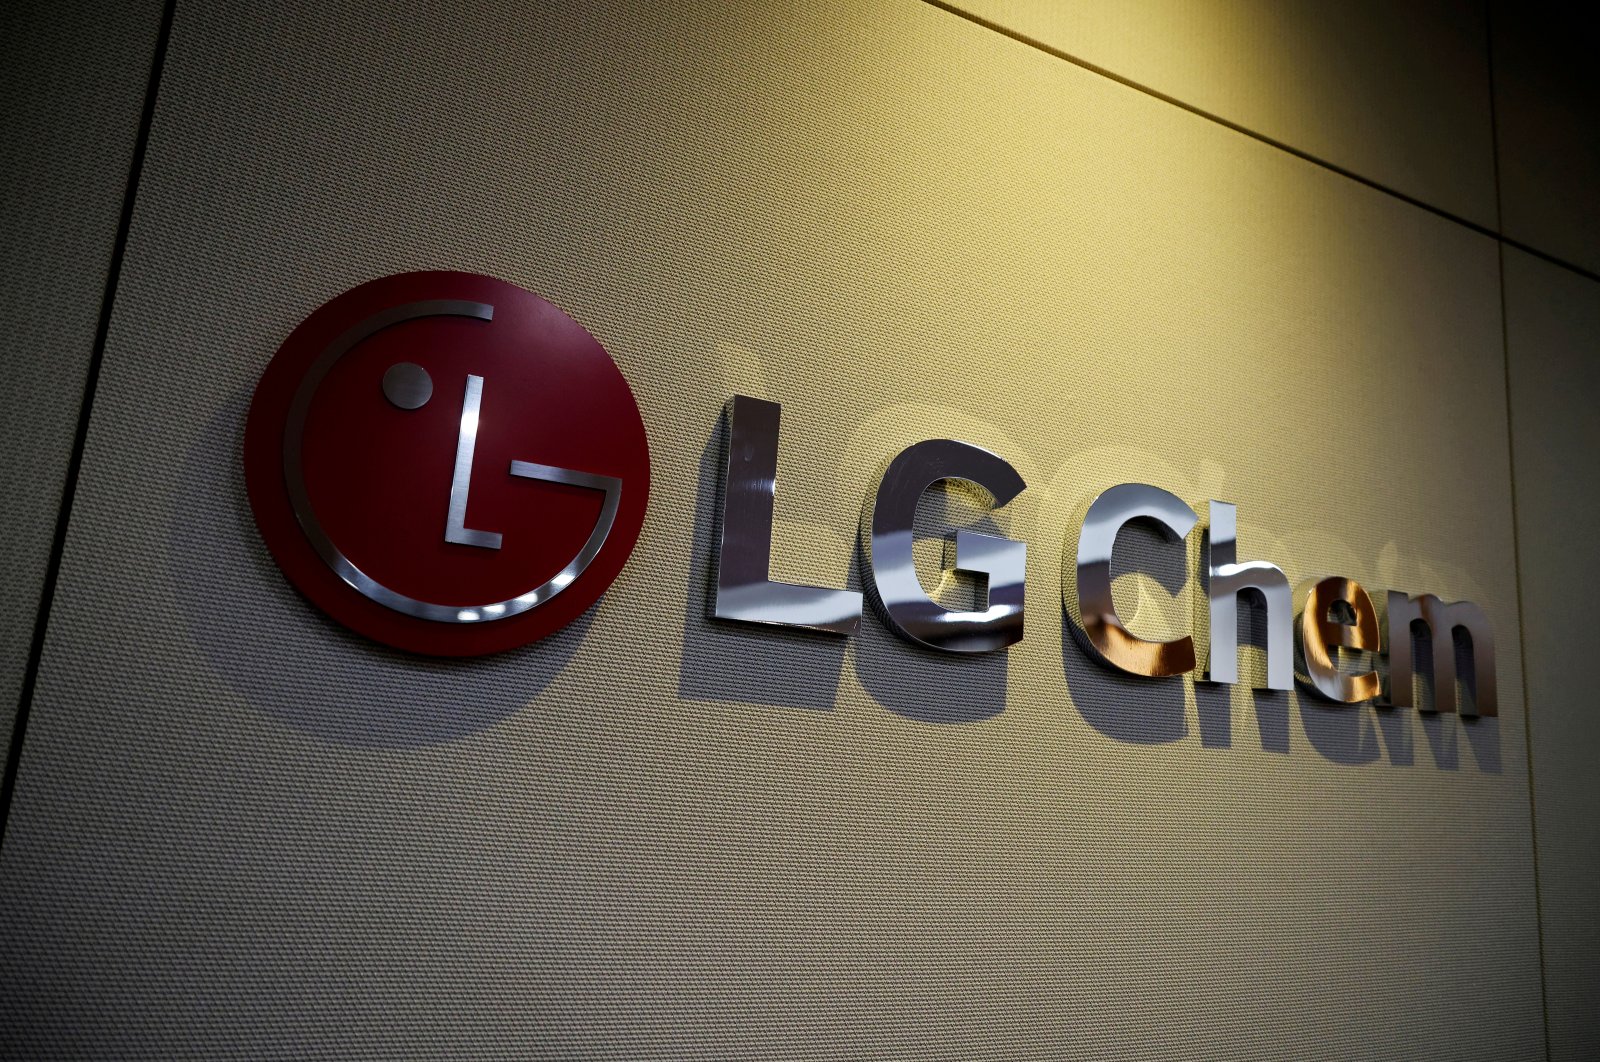 The logo of LG Chem, an owner of LG Energy Solution, at its office building in Seoul, South Korea, Oct. 16, 2020. (Reuters Photo)